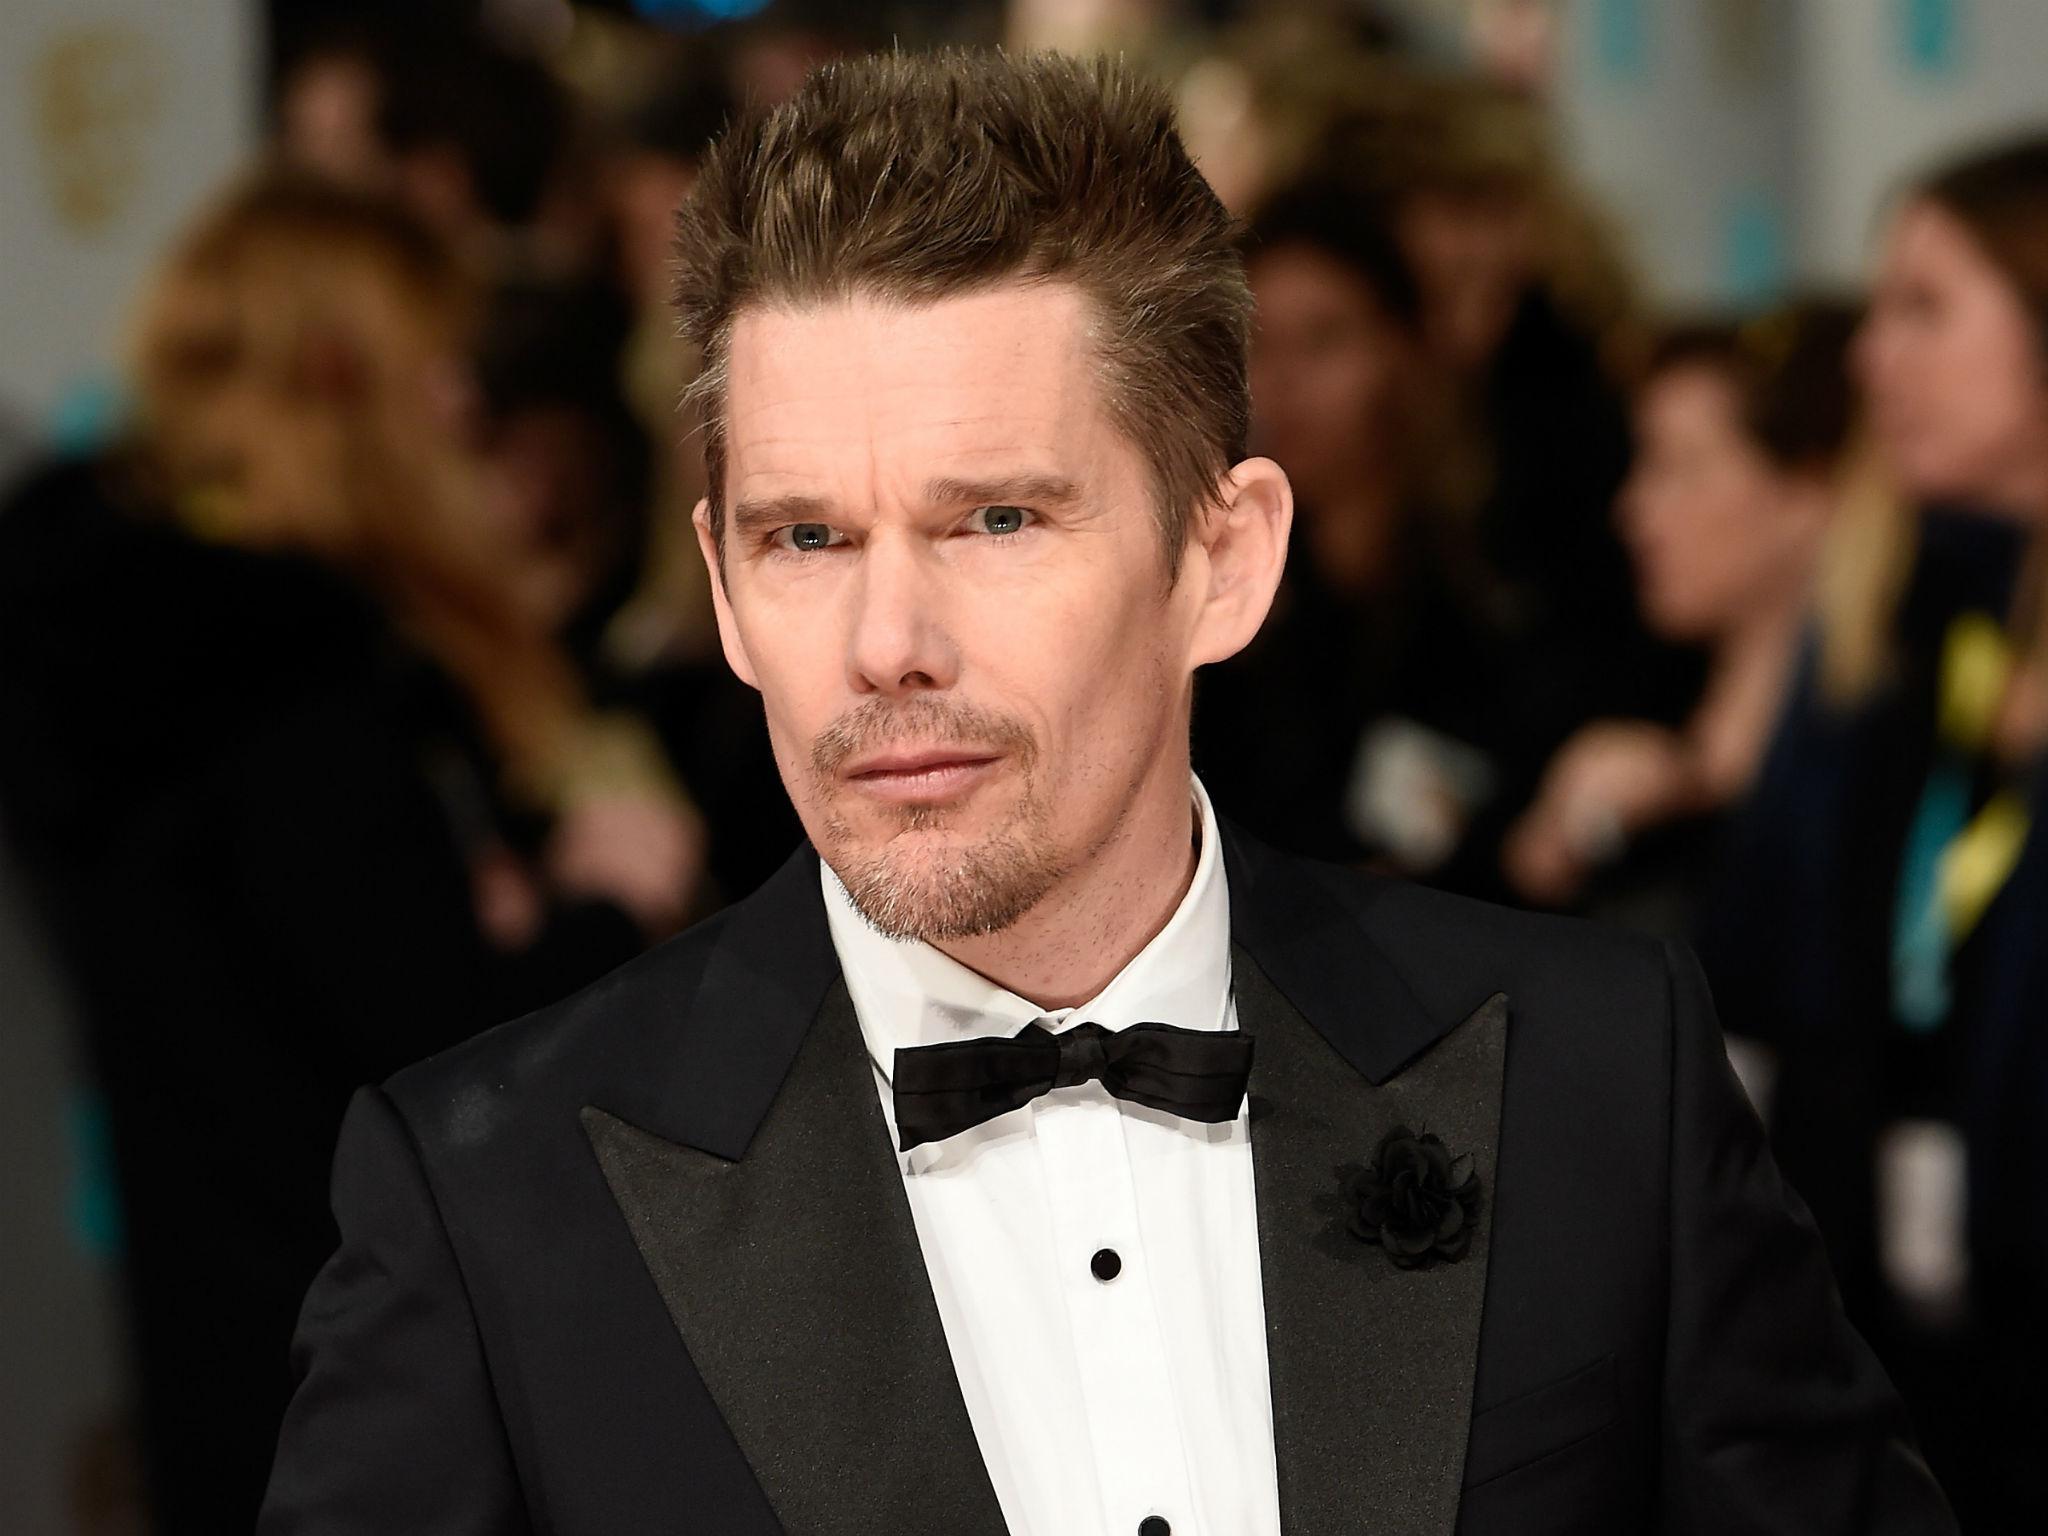 Ethan Hawke scrapped Apache film as he 'couldn't make a $240 million